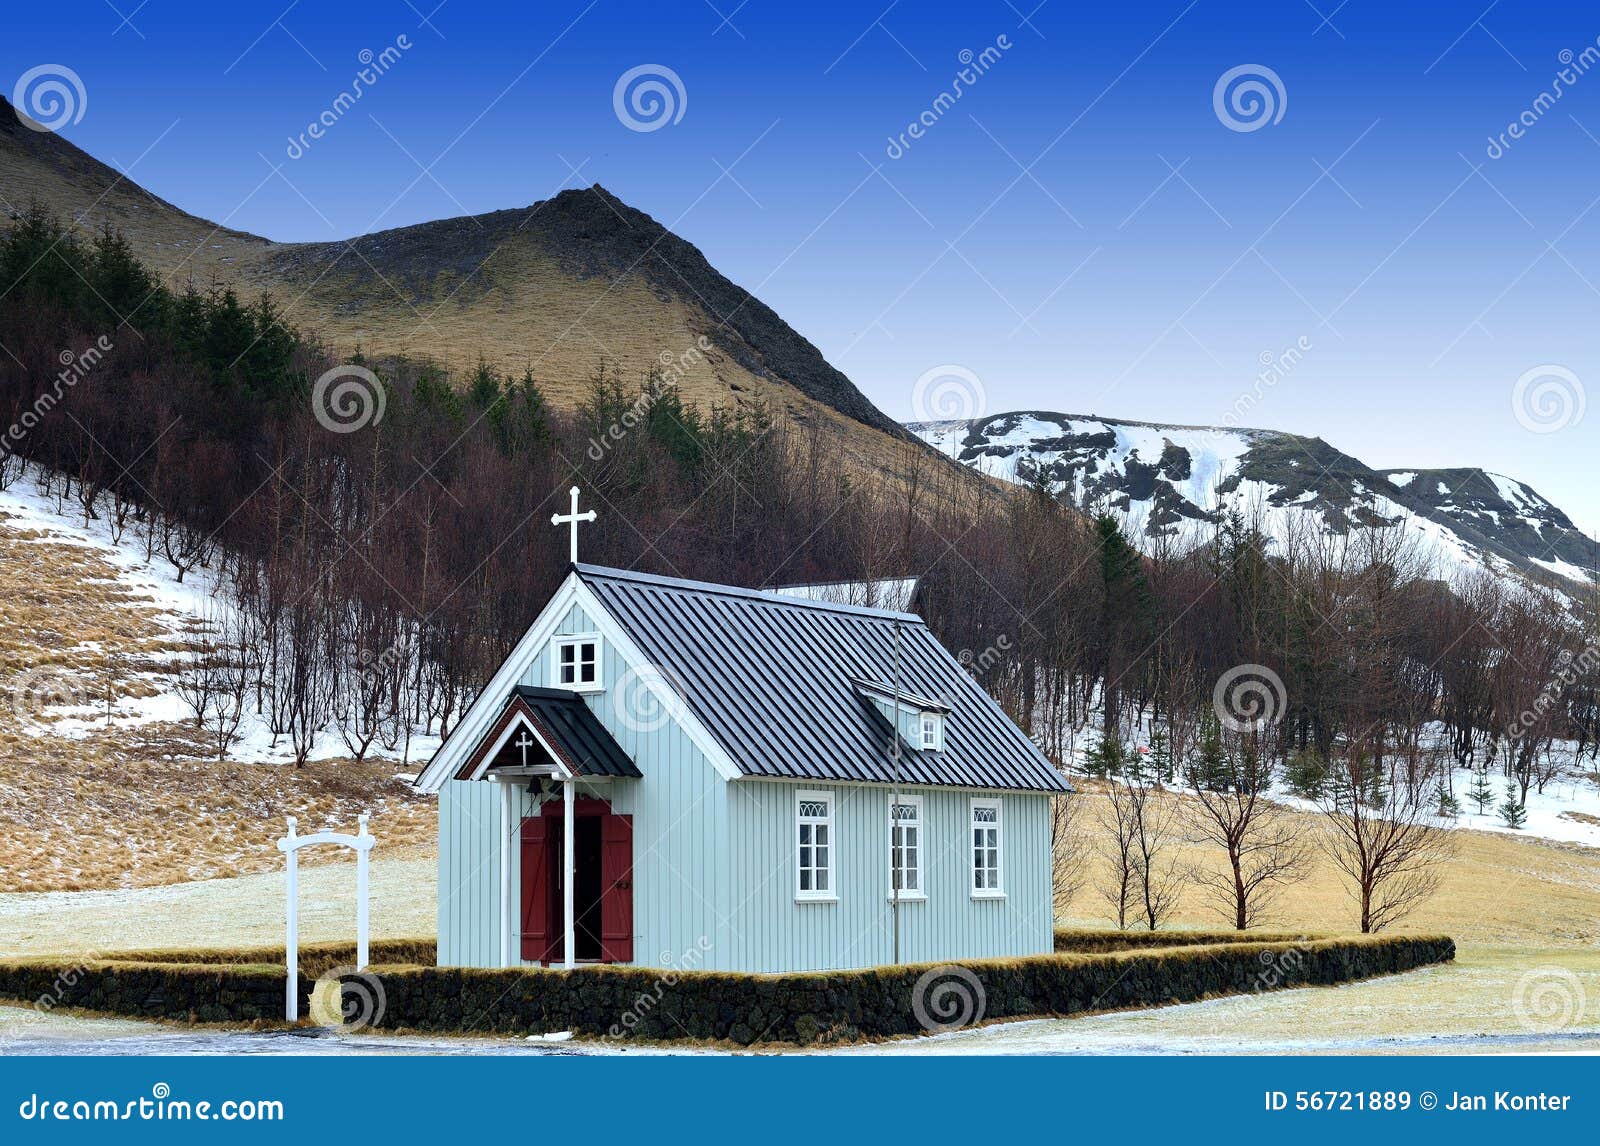 Church in Countryside, Iceland Stock Image - Image of countryside ...